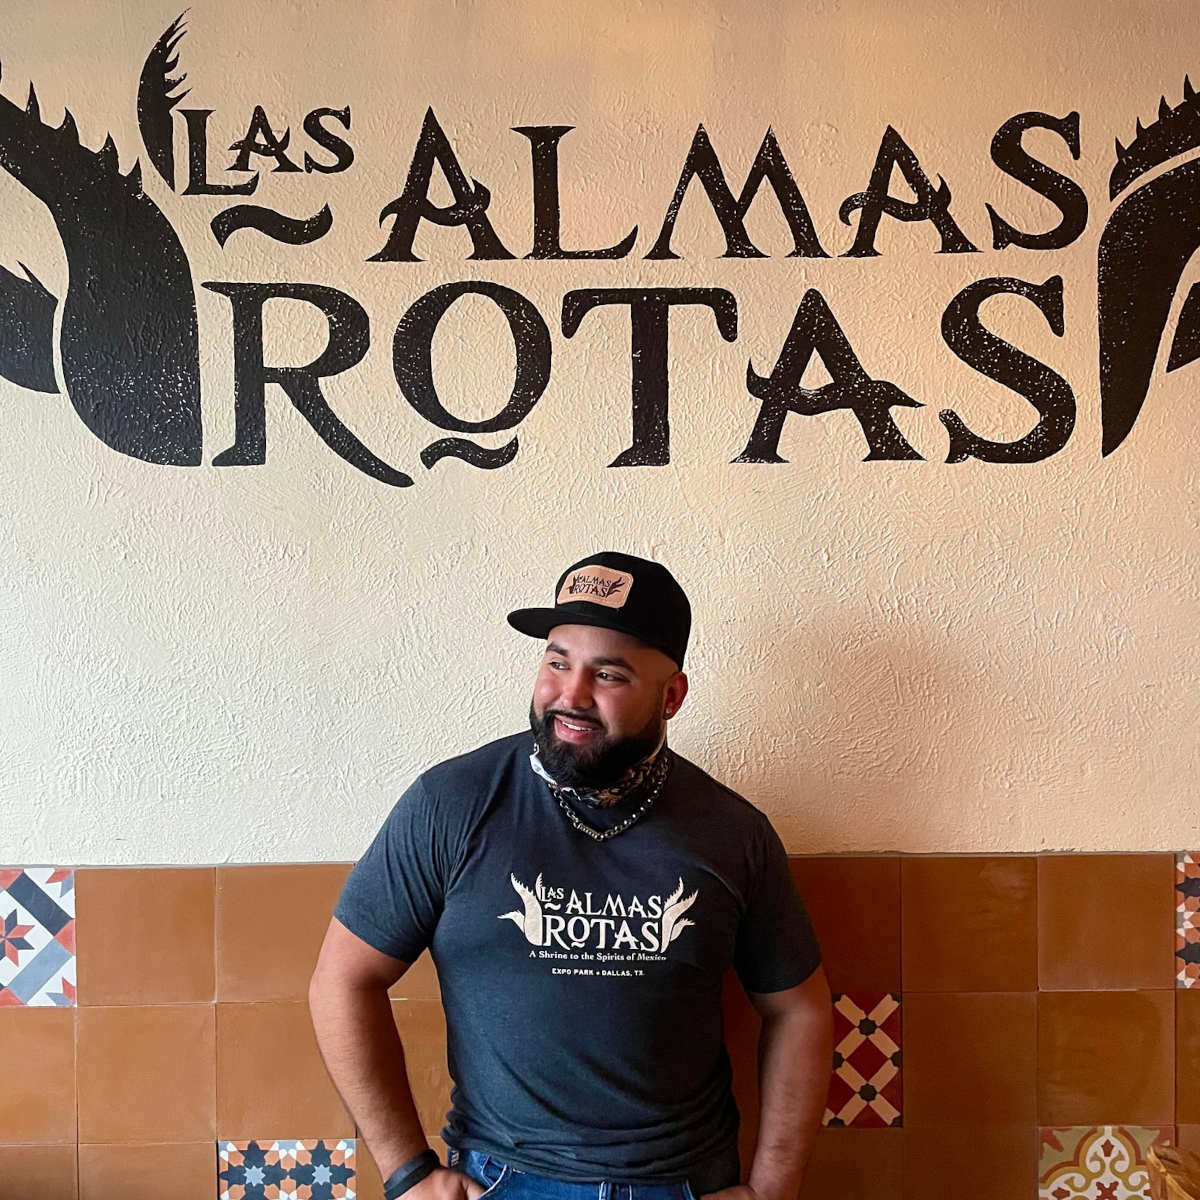 A person is wearing a Las Almas Rotas t-shirt